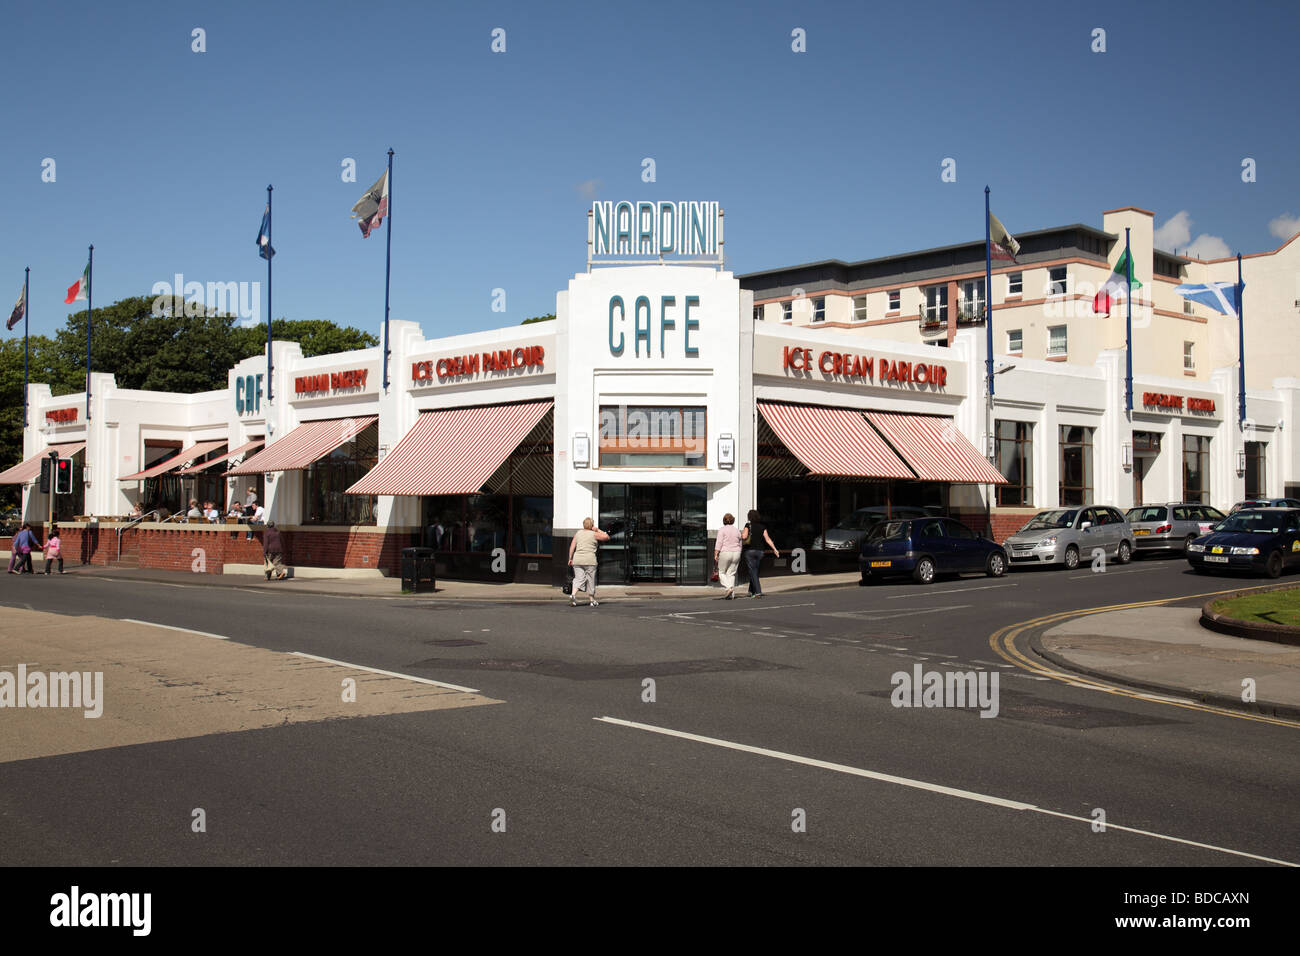 Nardini's famous Cafe and Ice Cream Parlour in warm sunny weather, Largs, North Ayrshire, Scotland, UK Stock Photo